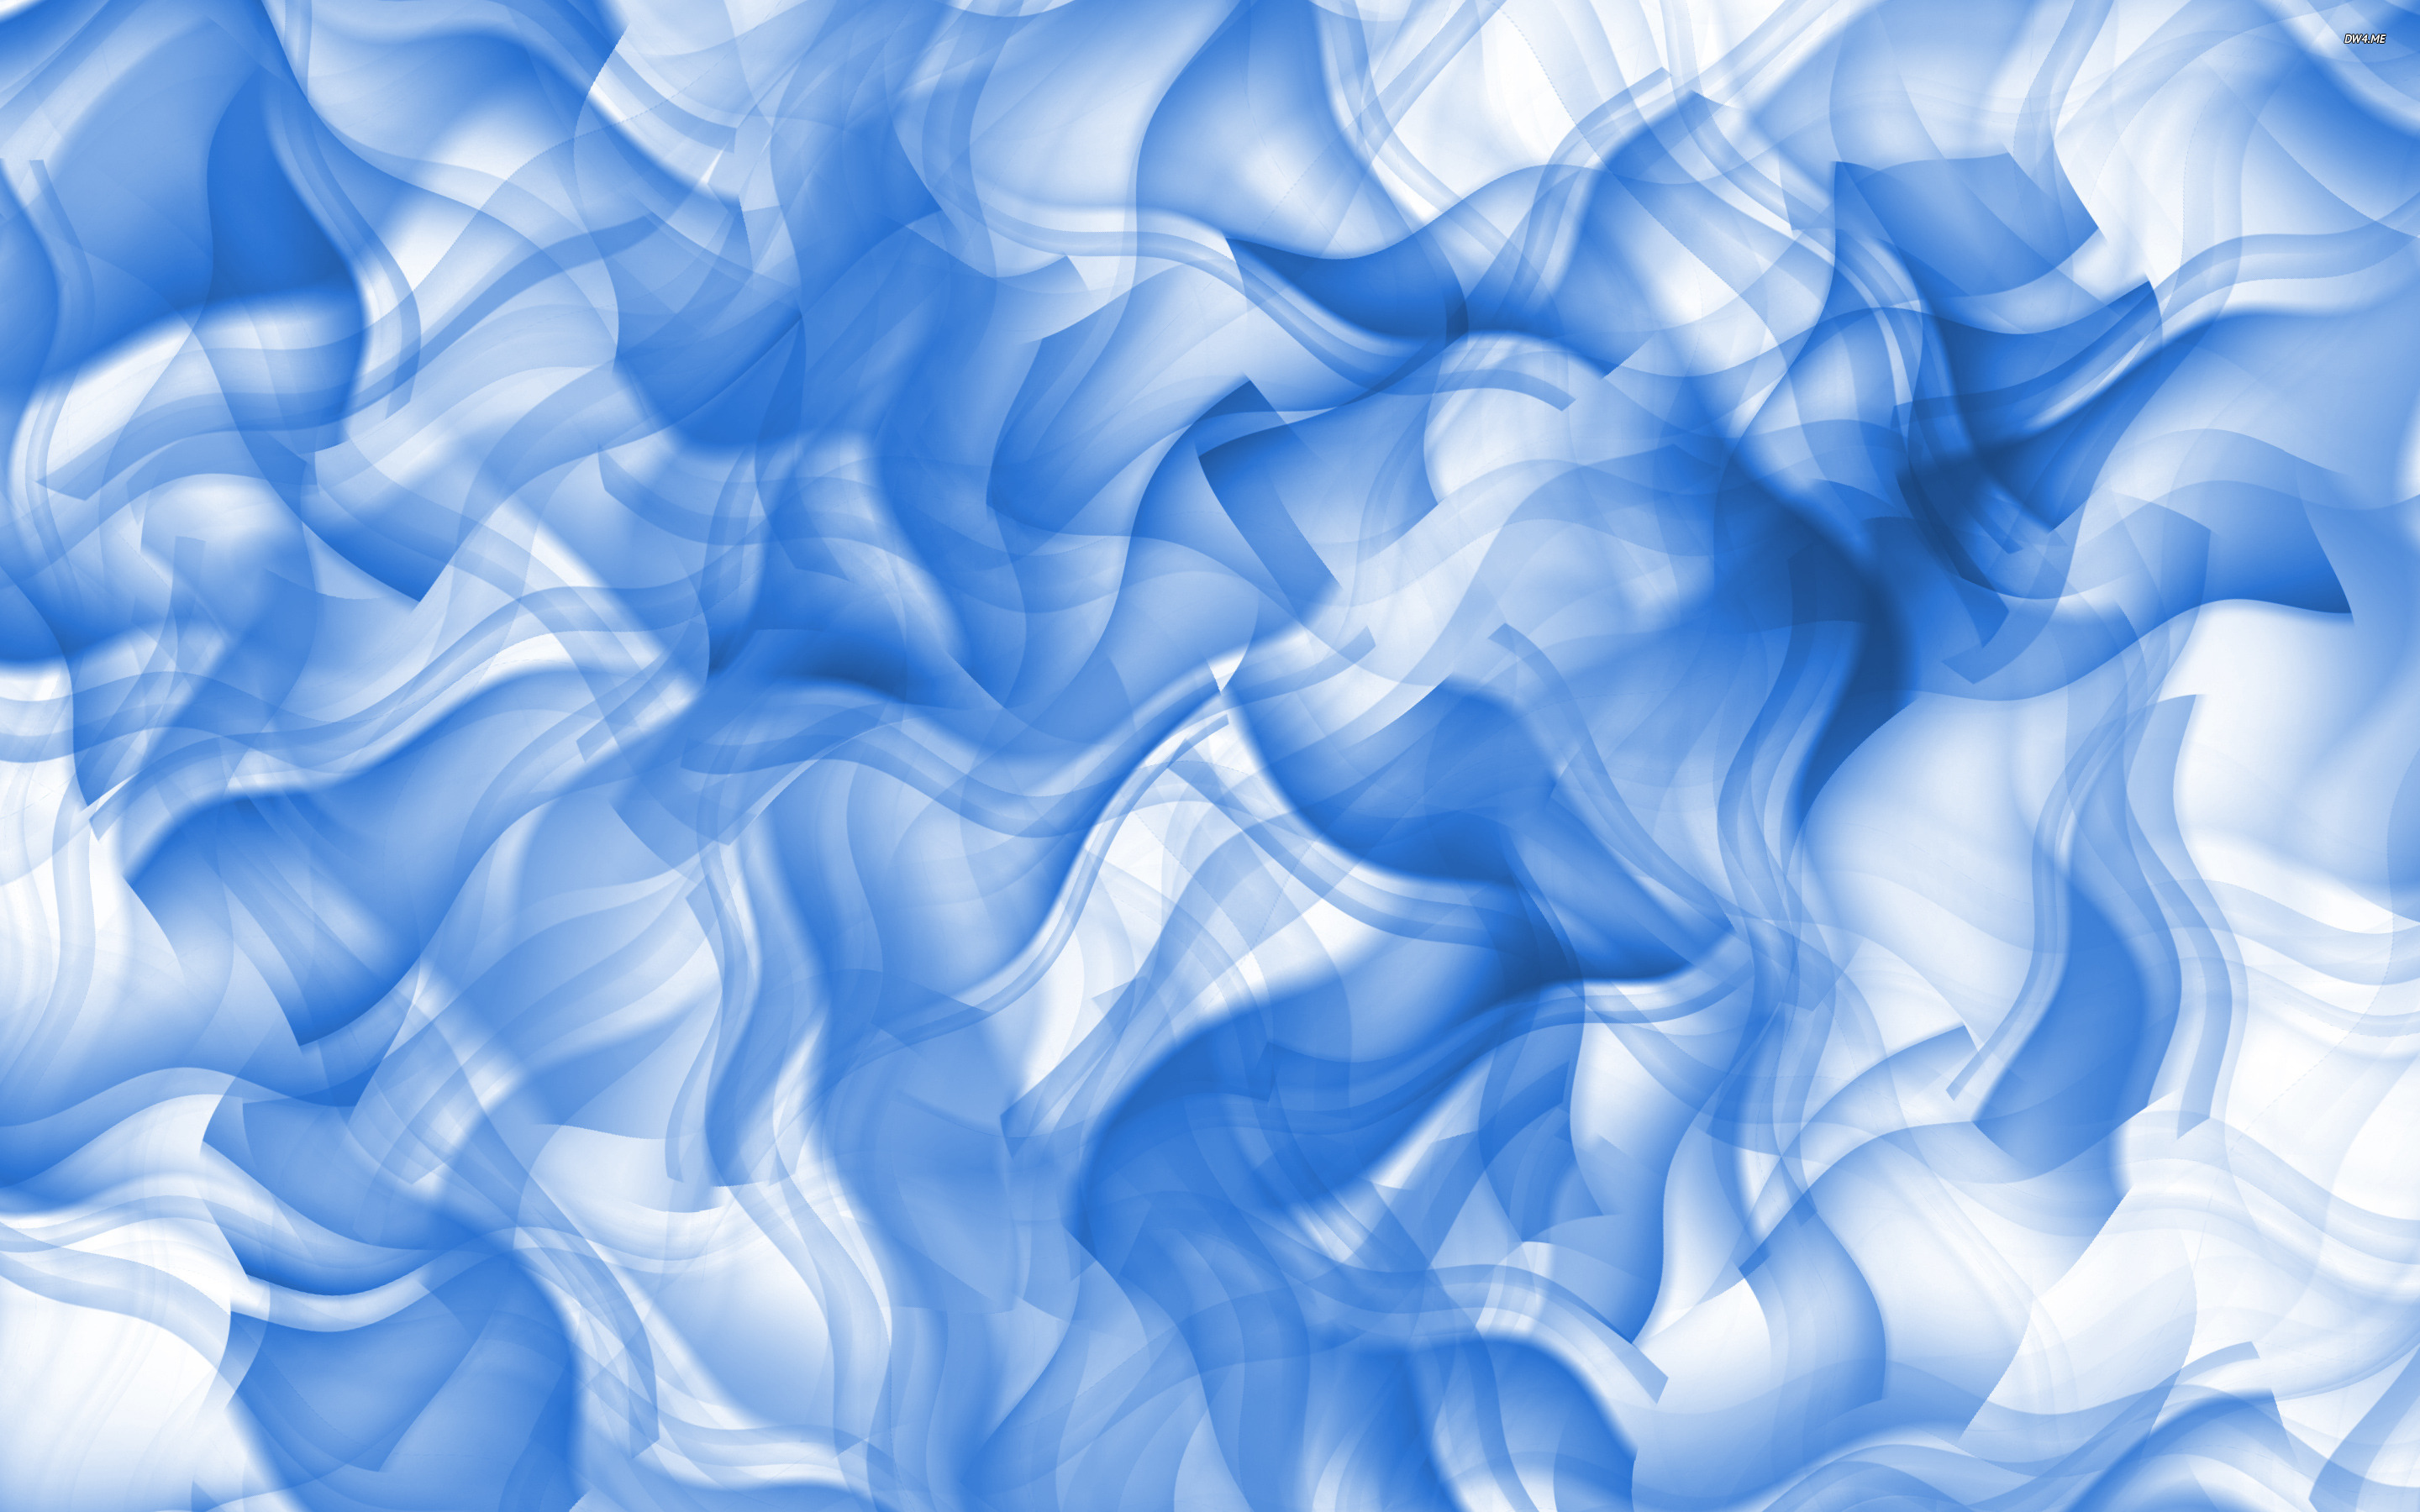 Abstract Blue Smoke Background  Free Stock Images  Photos  274483449   StockFreeImagescom